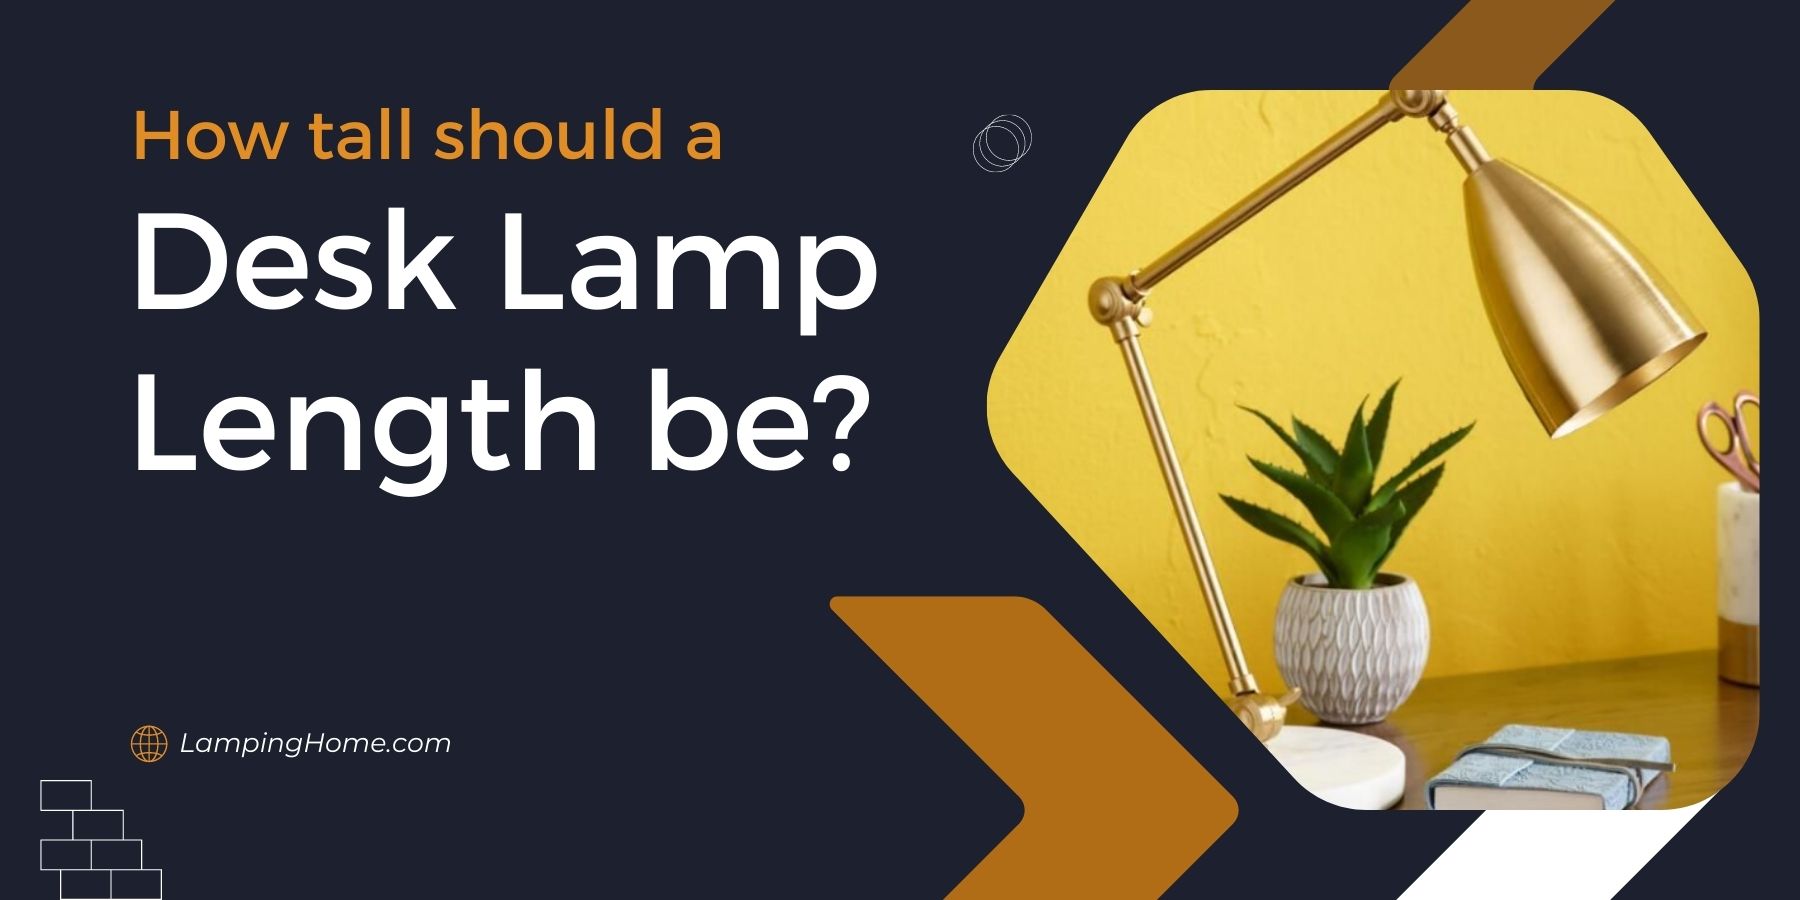 How tall should a desk lamp be?